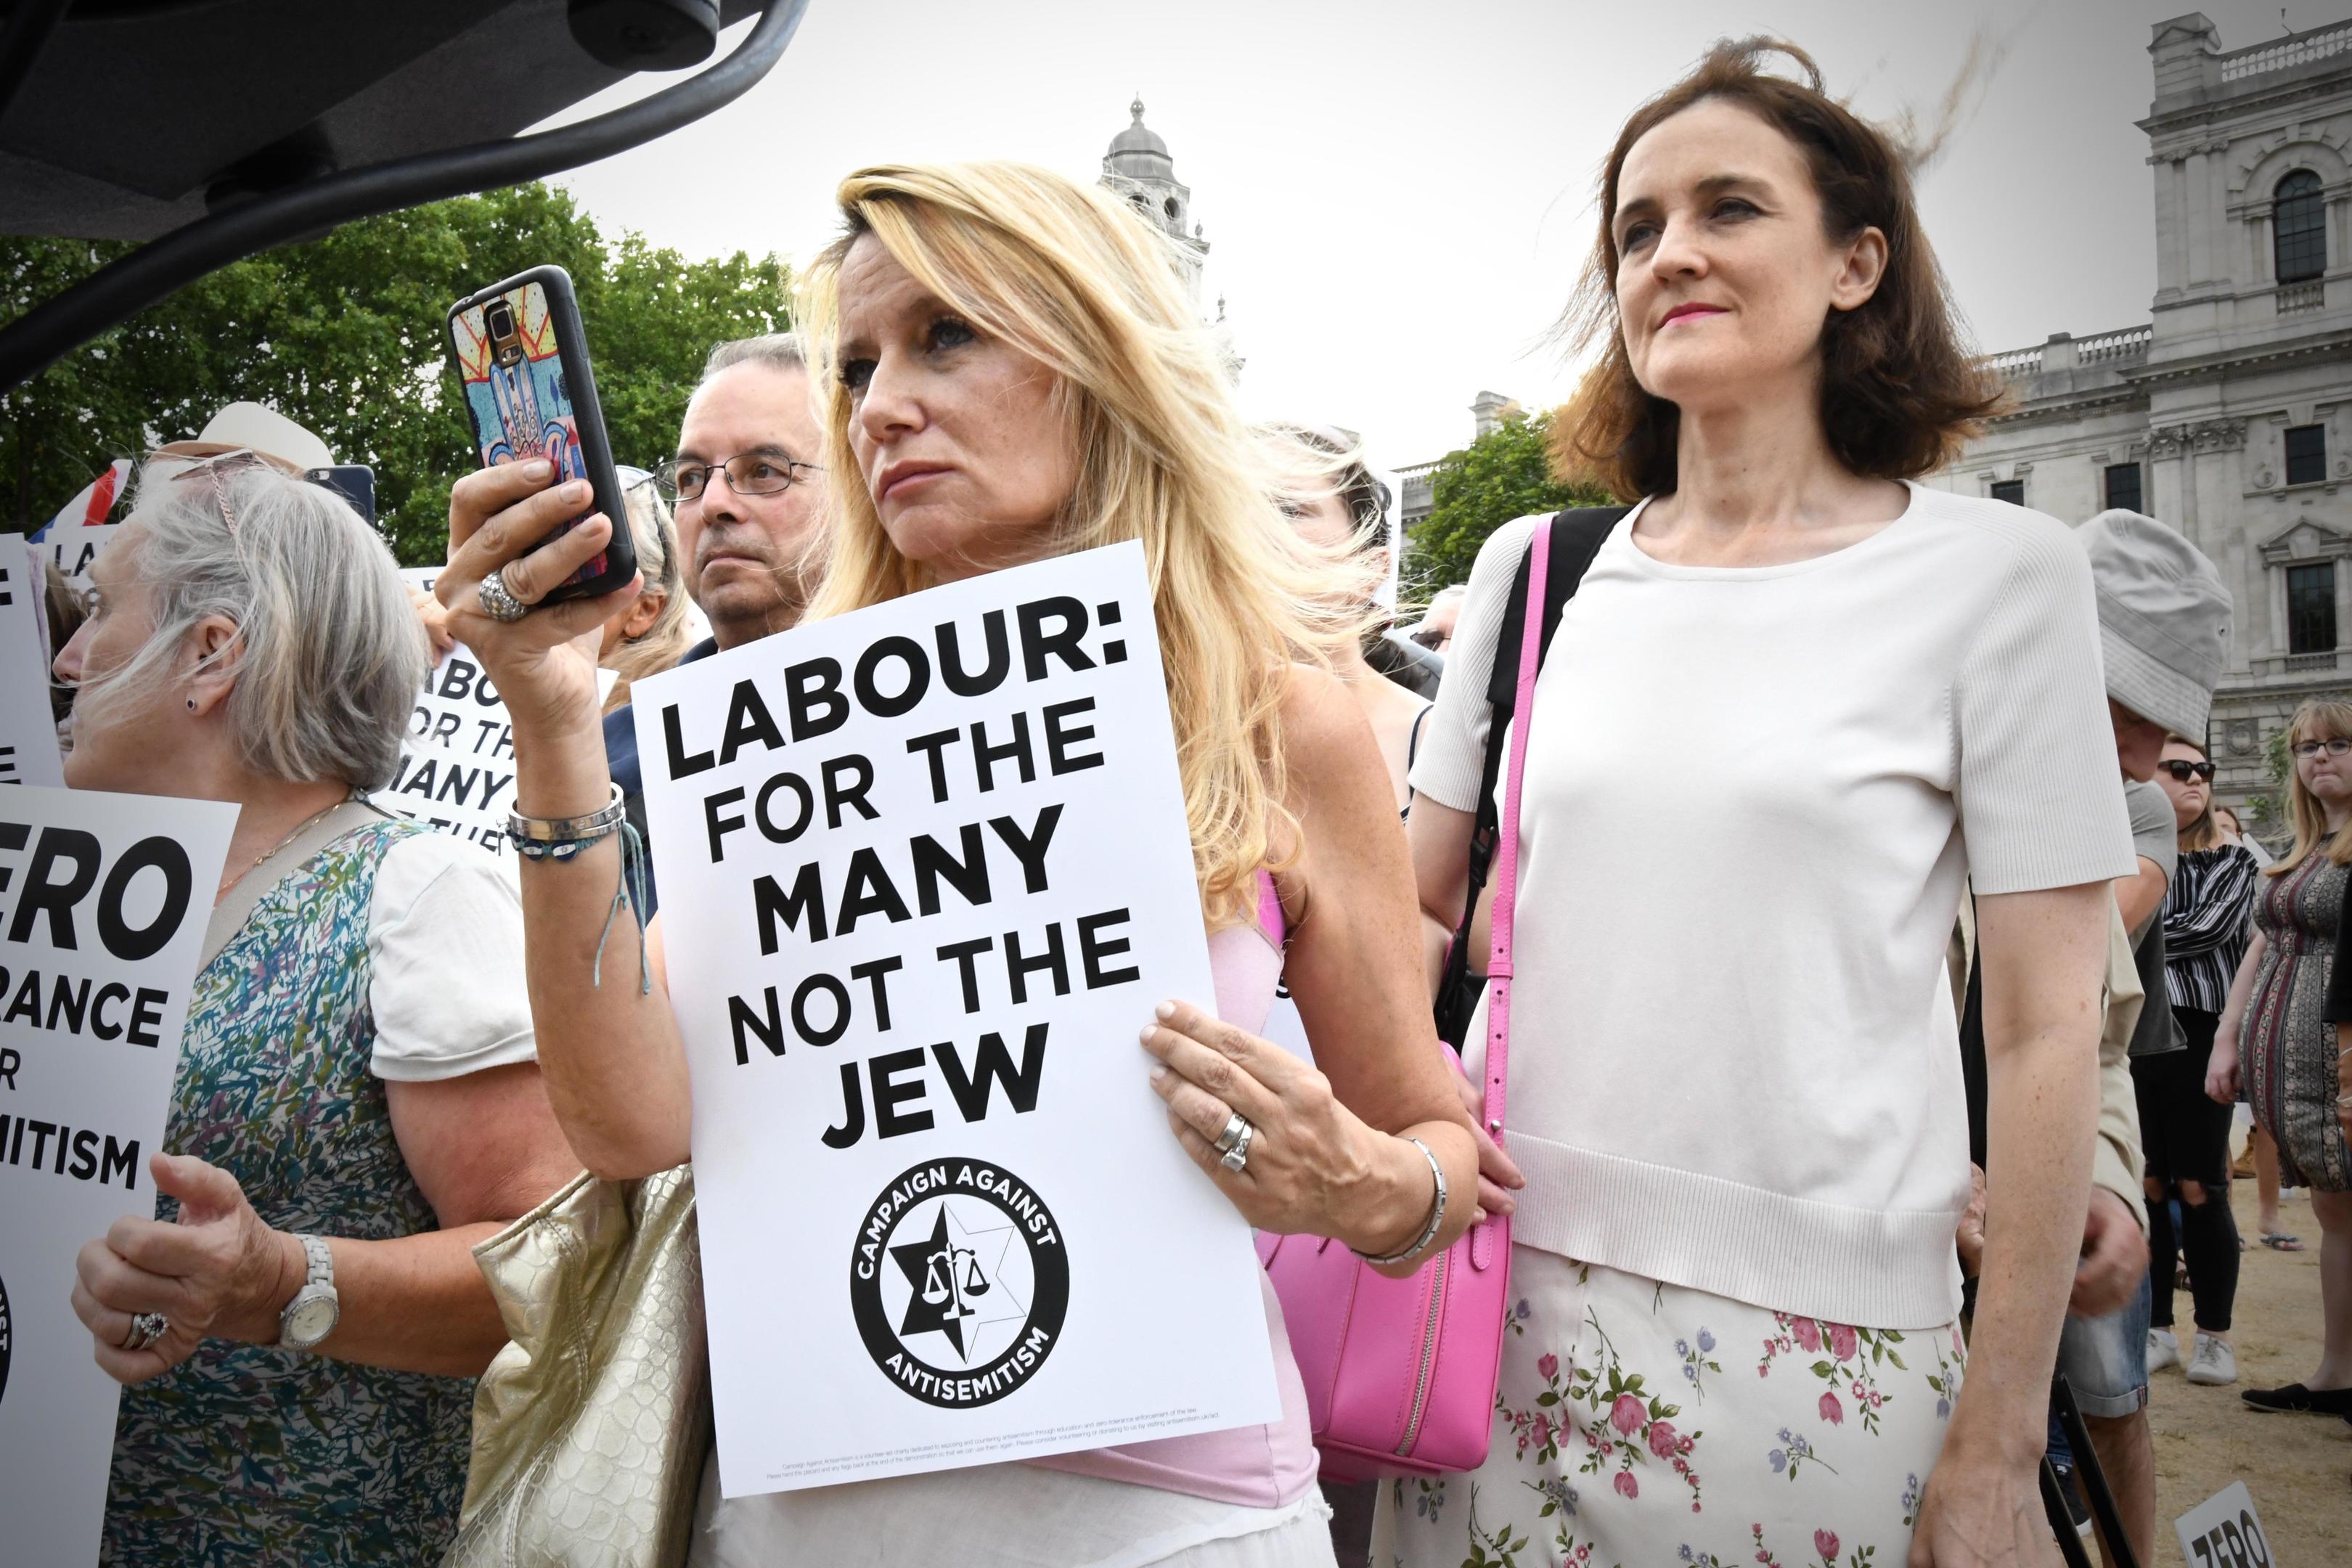 Protests take place outside Parliament by the Jewish community increasingly concerned by levels of anti semitism in the Labour Party. (Incmonocle)